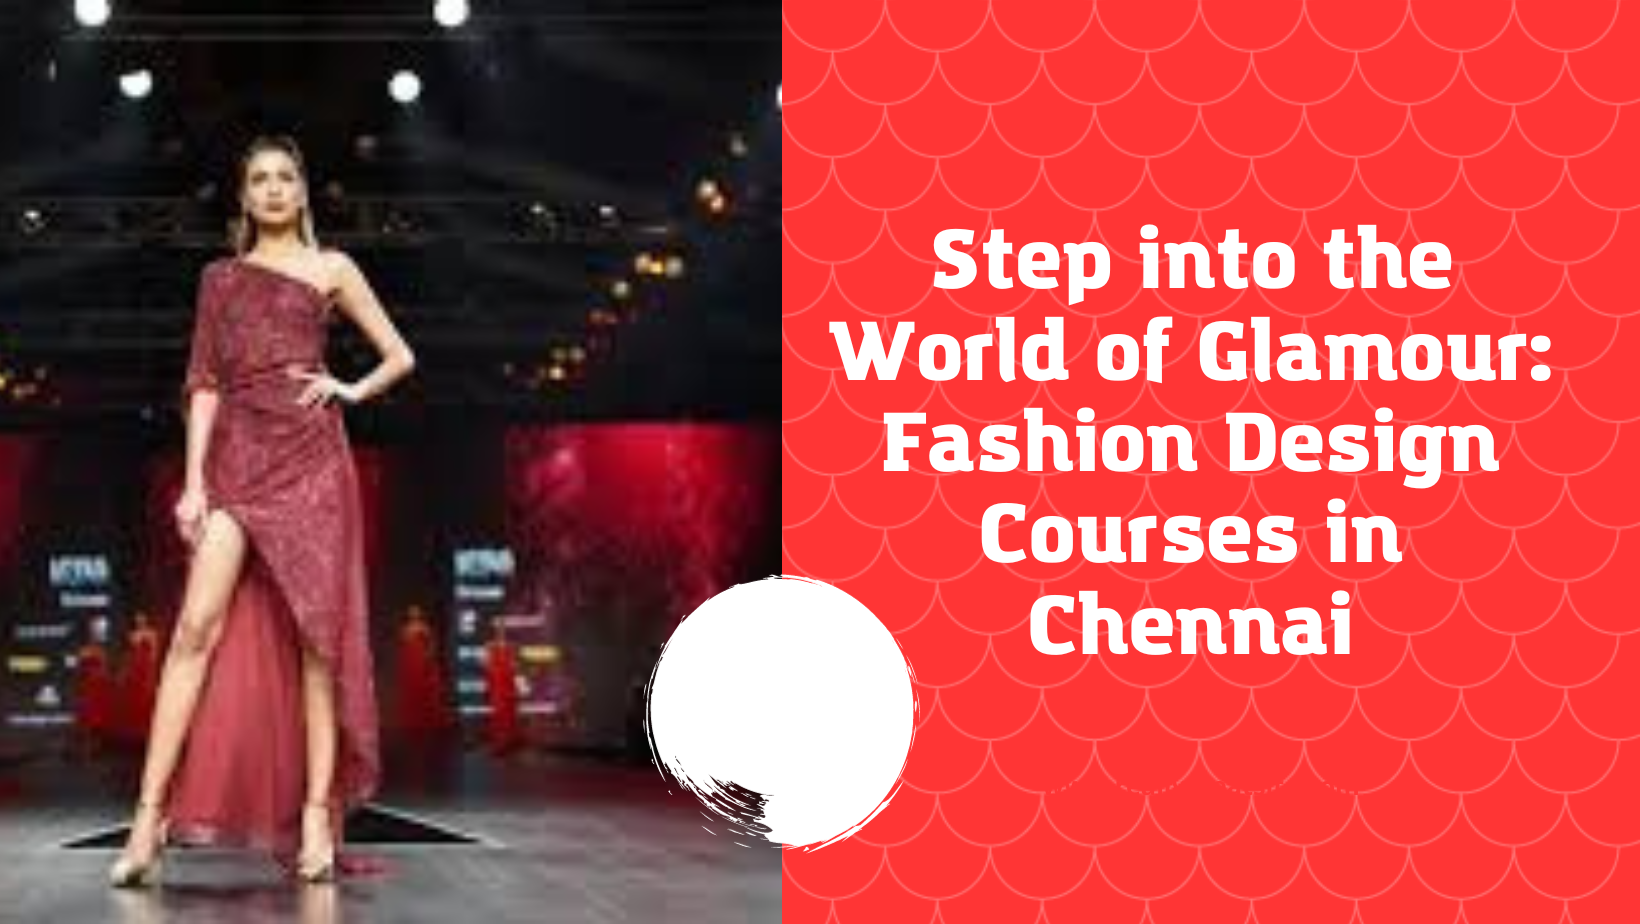 Step into the World of Glamour Fashion Design Courses in Chennai